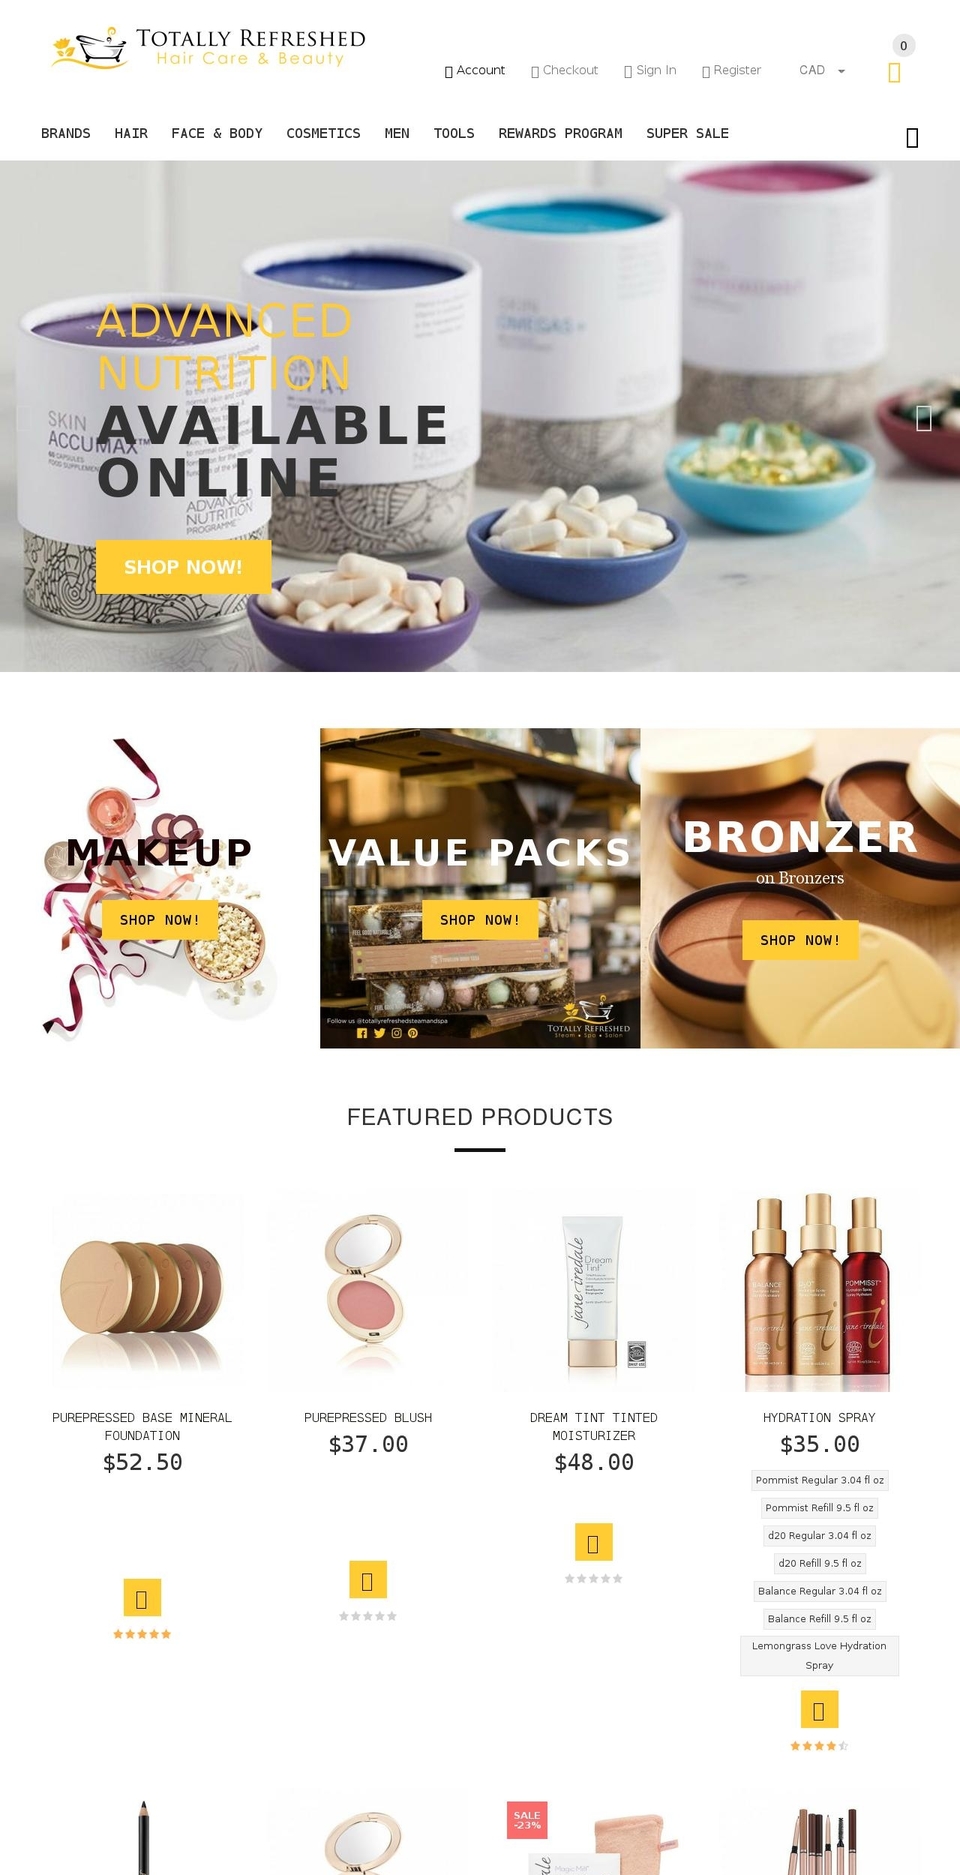 yourstore-v2-1-6 Shopify theme site example totallyrefreshedshop.com